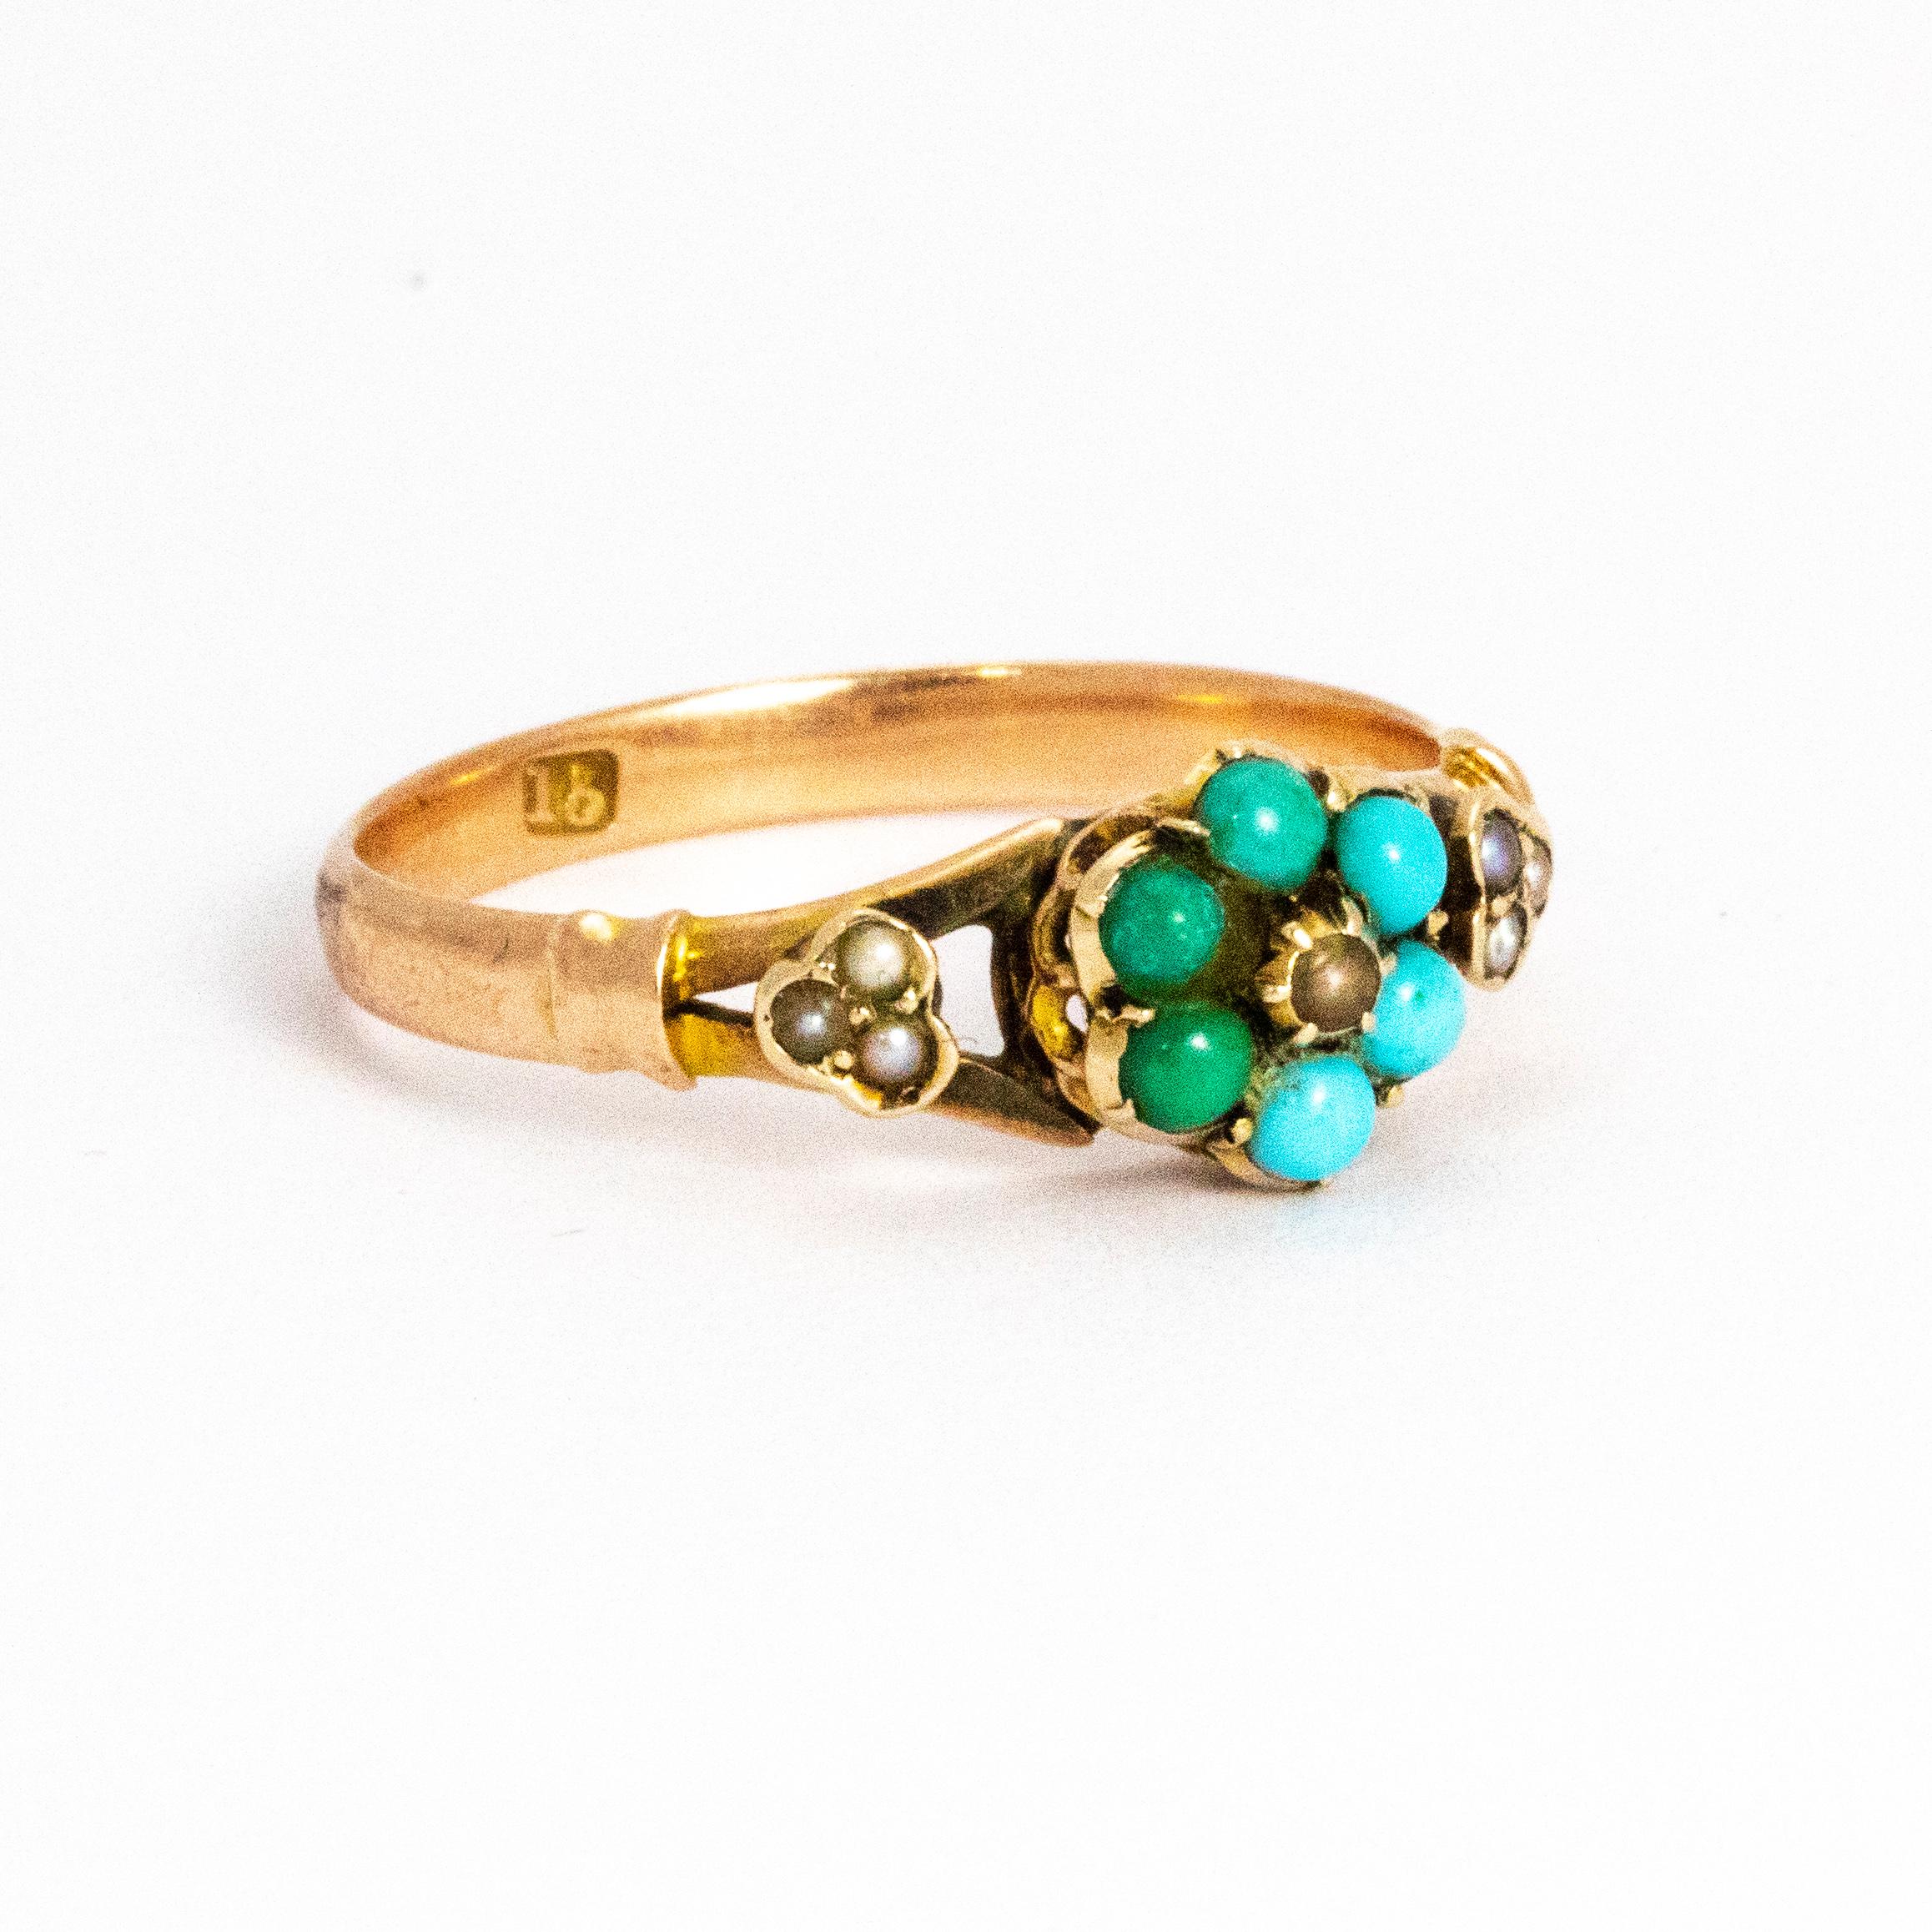 Women's or Men's Mid-19th Century Turquoise and Pearl 15 Carat Gold Ring